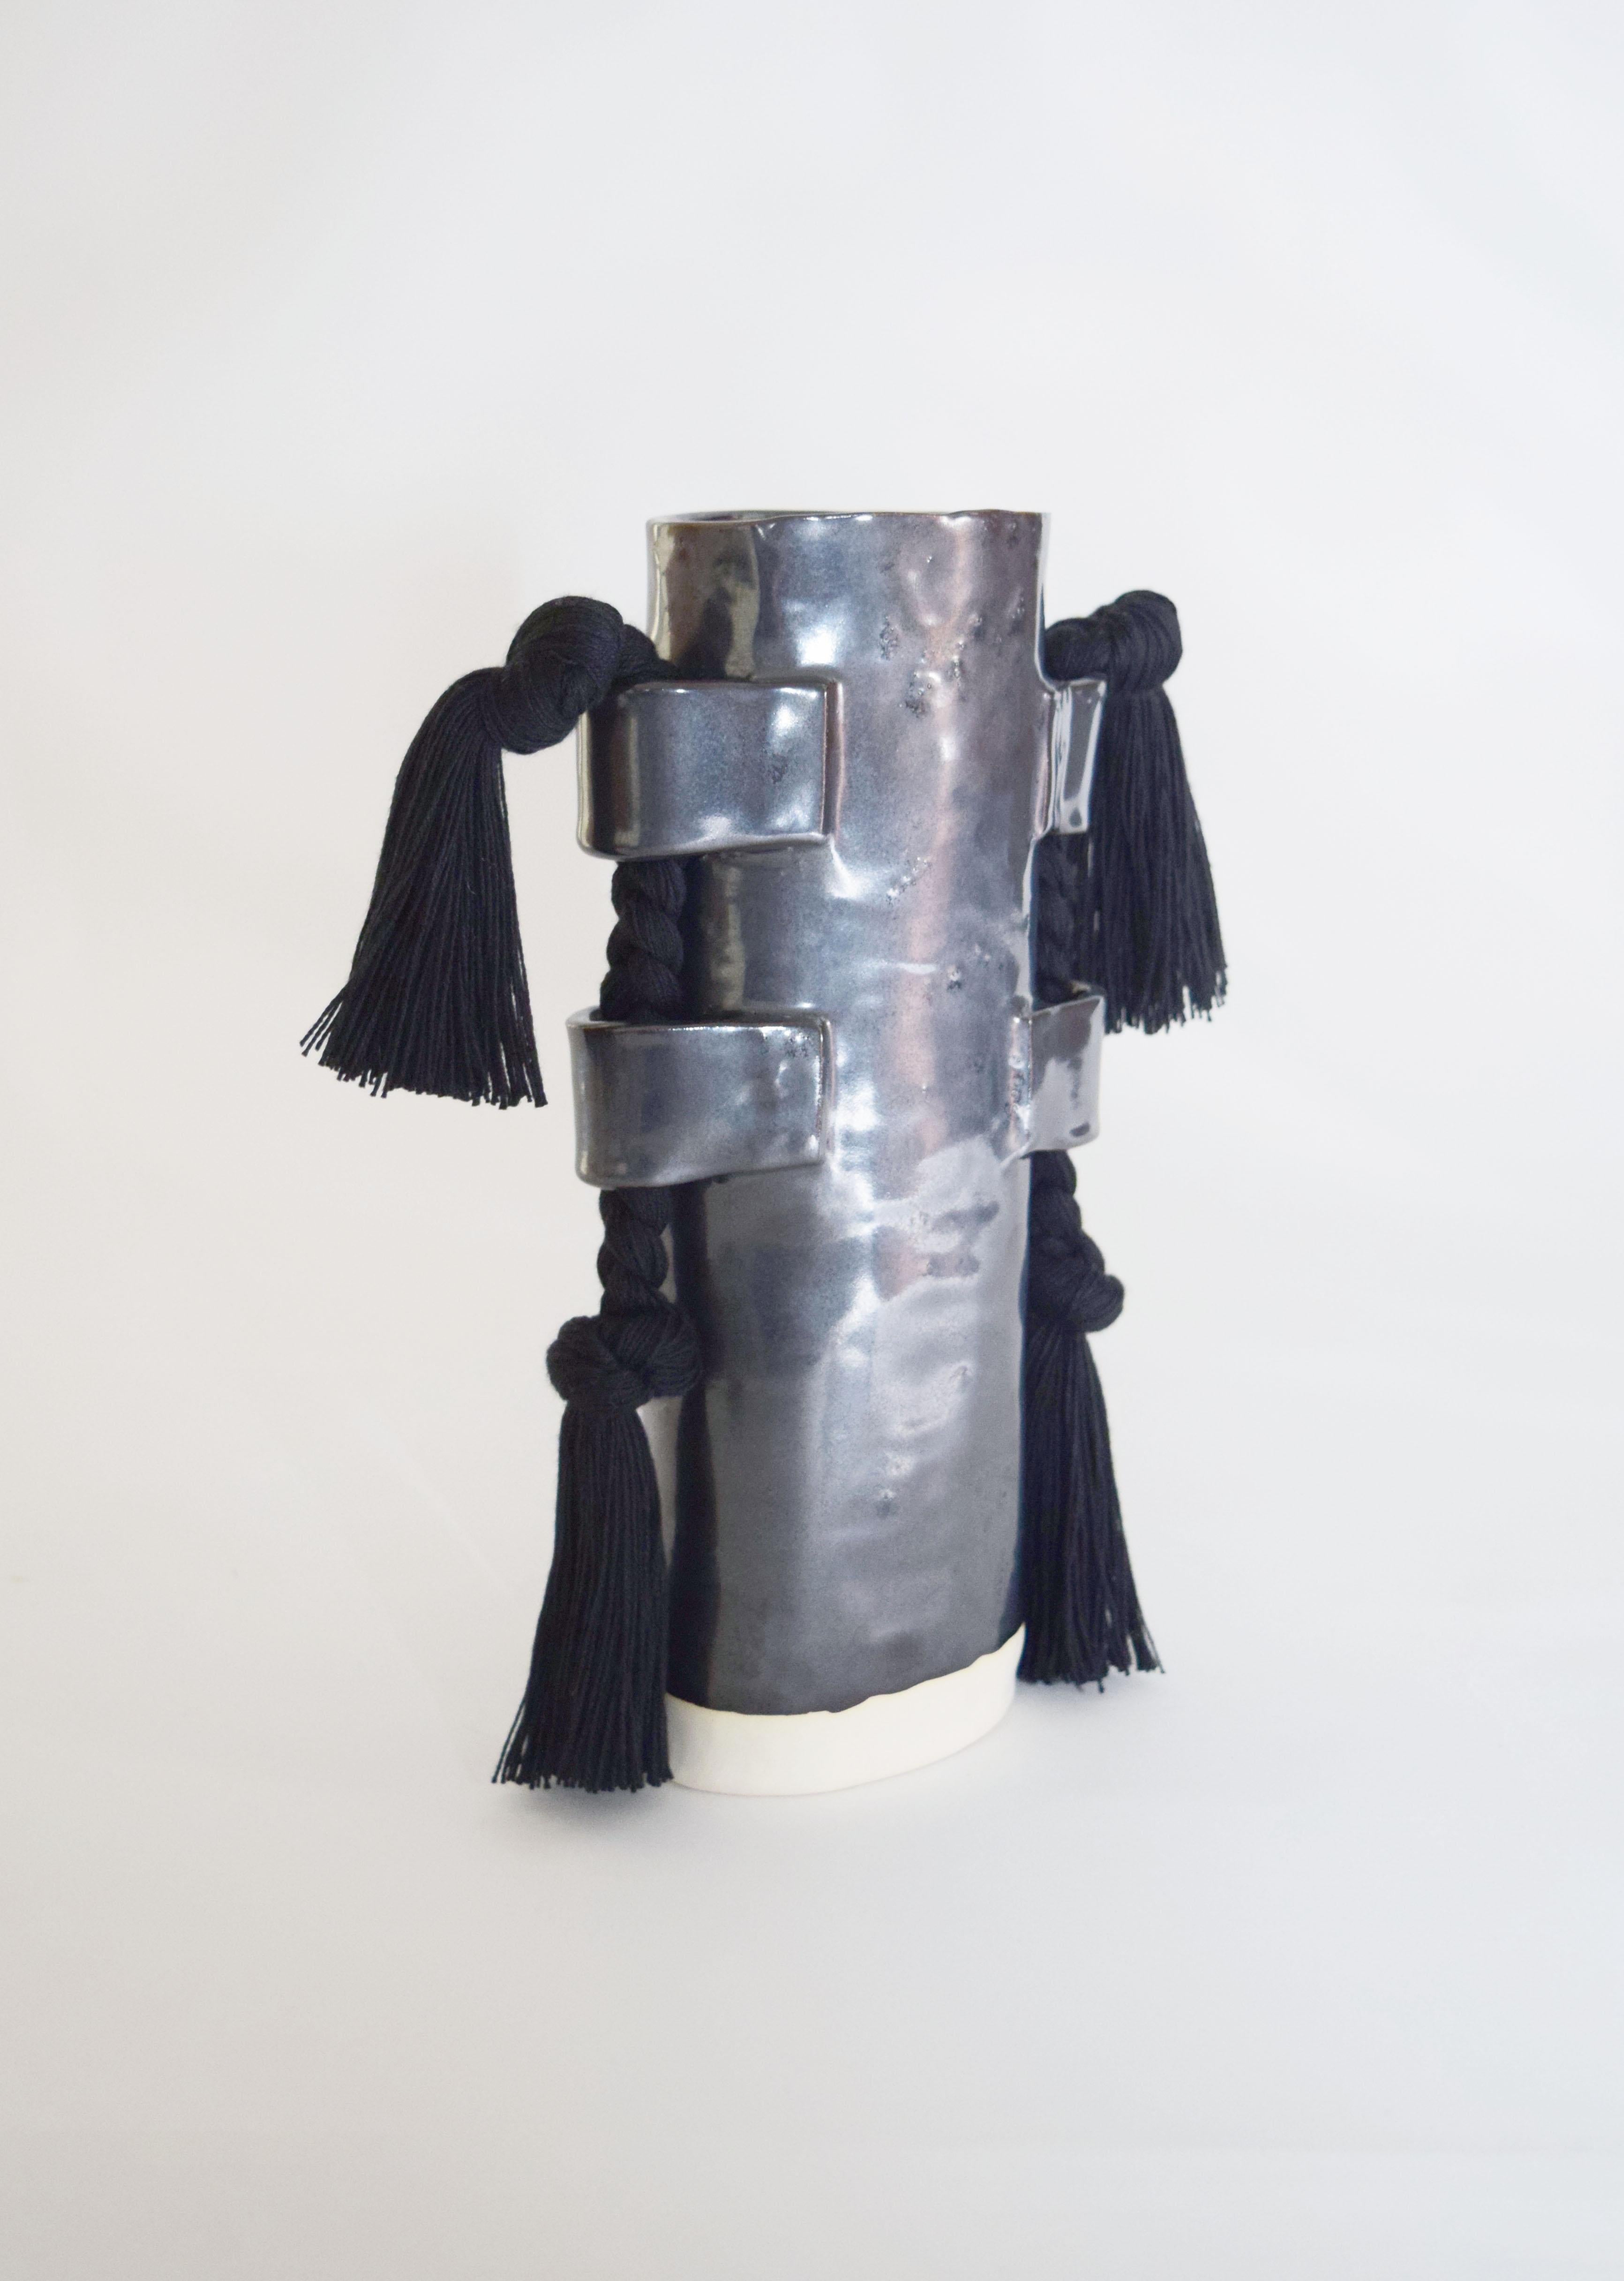 Vase #504 by Karen Gayle Tinney

Hand formed stoneware vase with black glaze. Inside is glazed black and will hold water - please take care not to damage fringe areas. Black cotton fringe braids with fringe are applied to the outside of the vase.